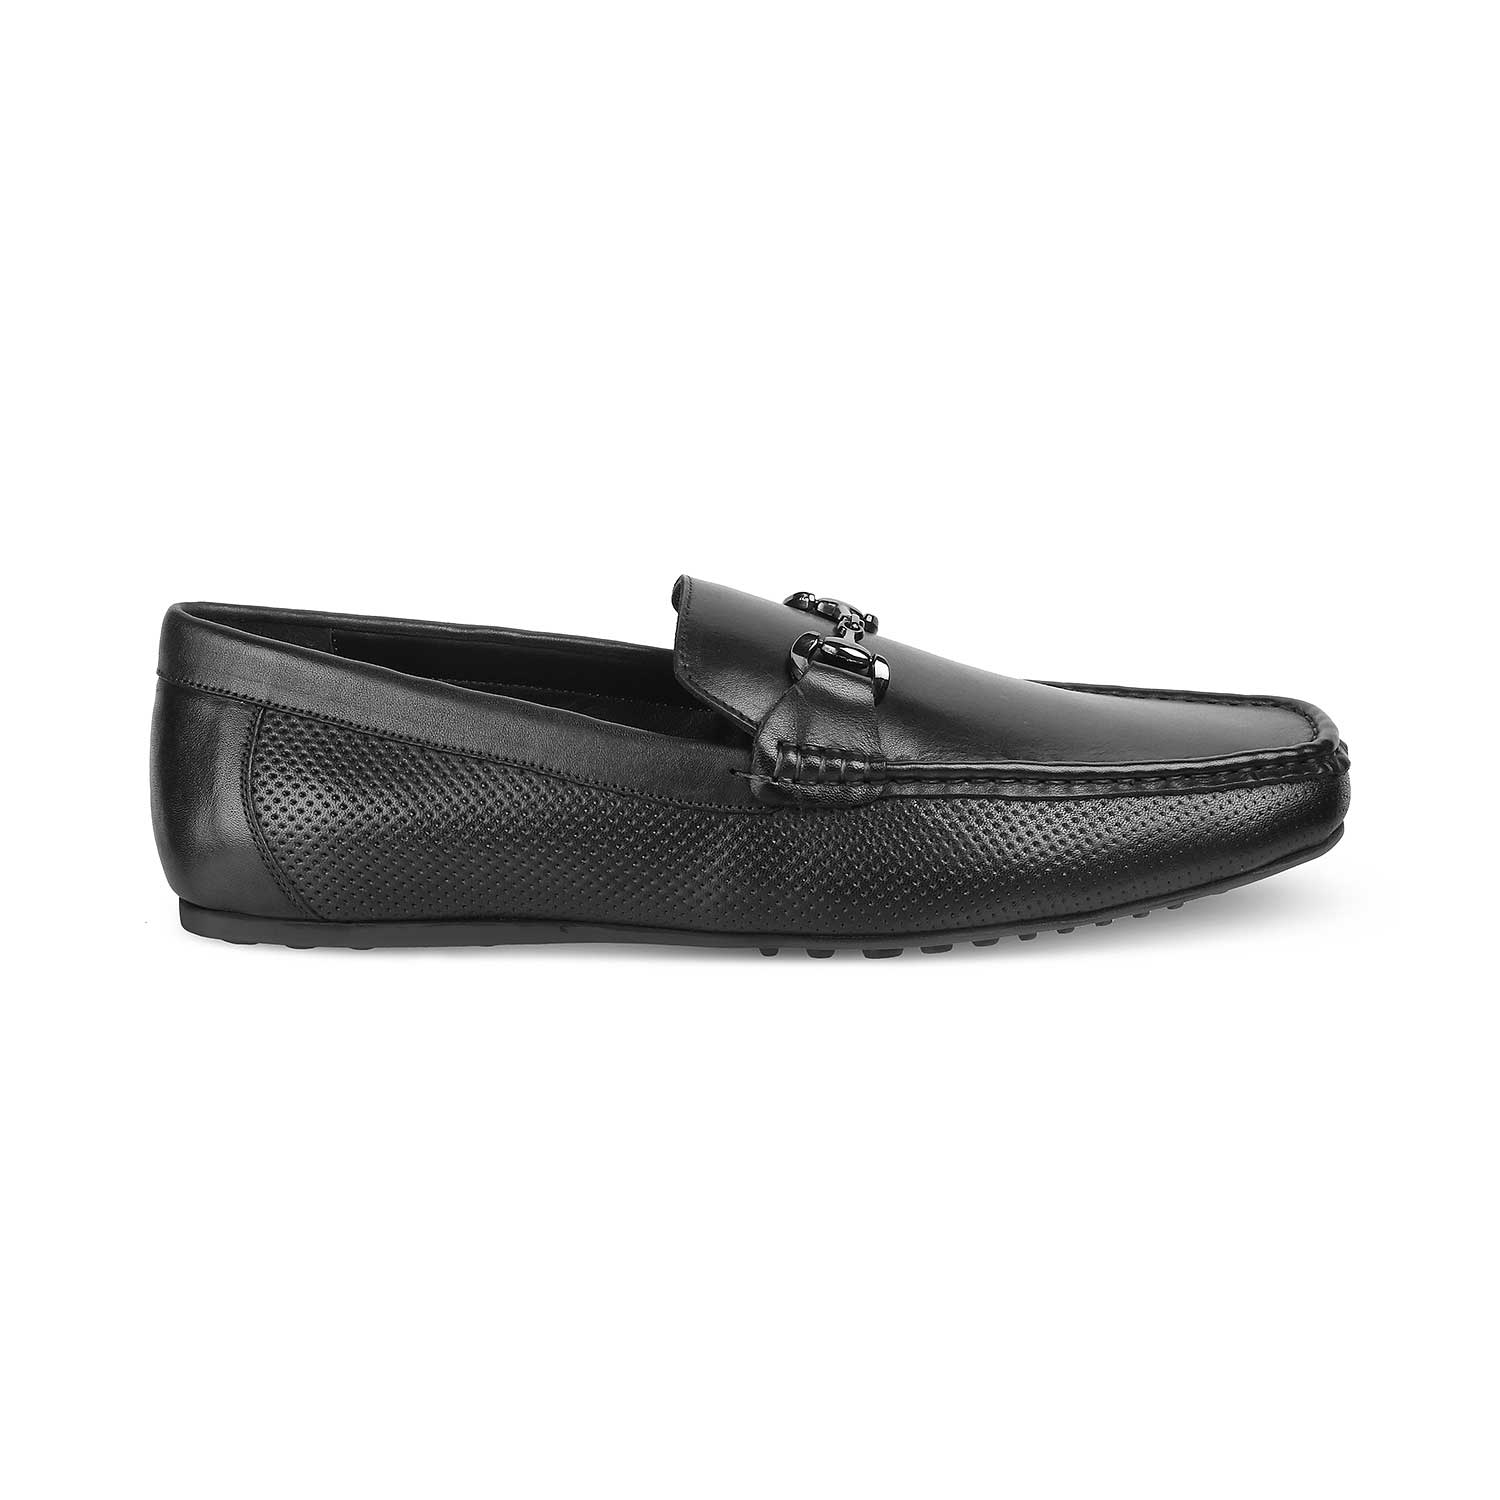 Tresmode-The Otter Black Men's Leather Driving Loafers Tresmode-Tresmode